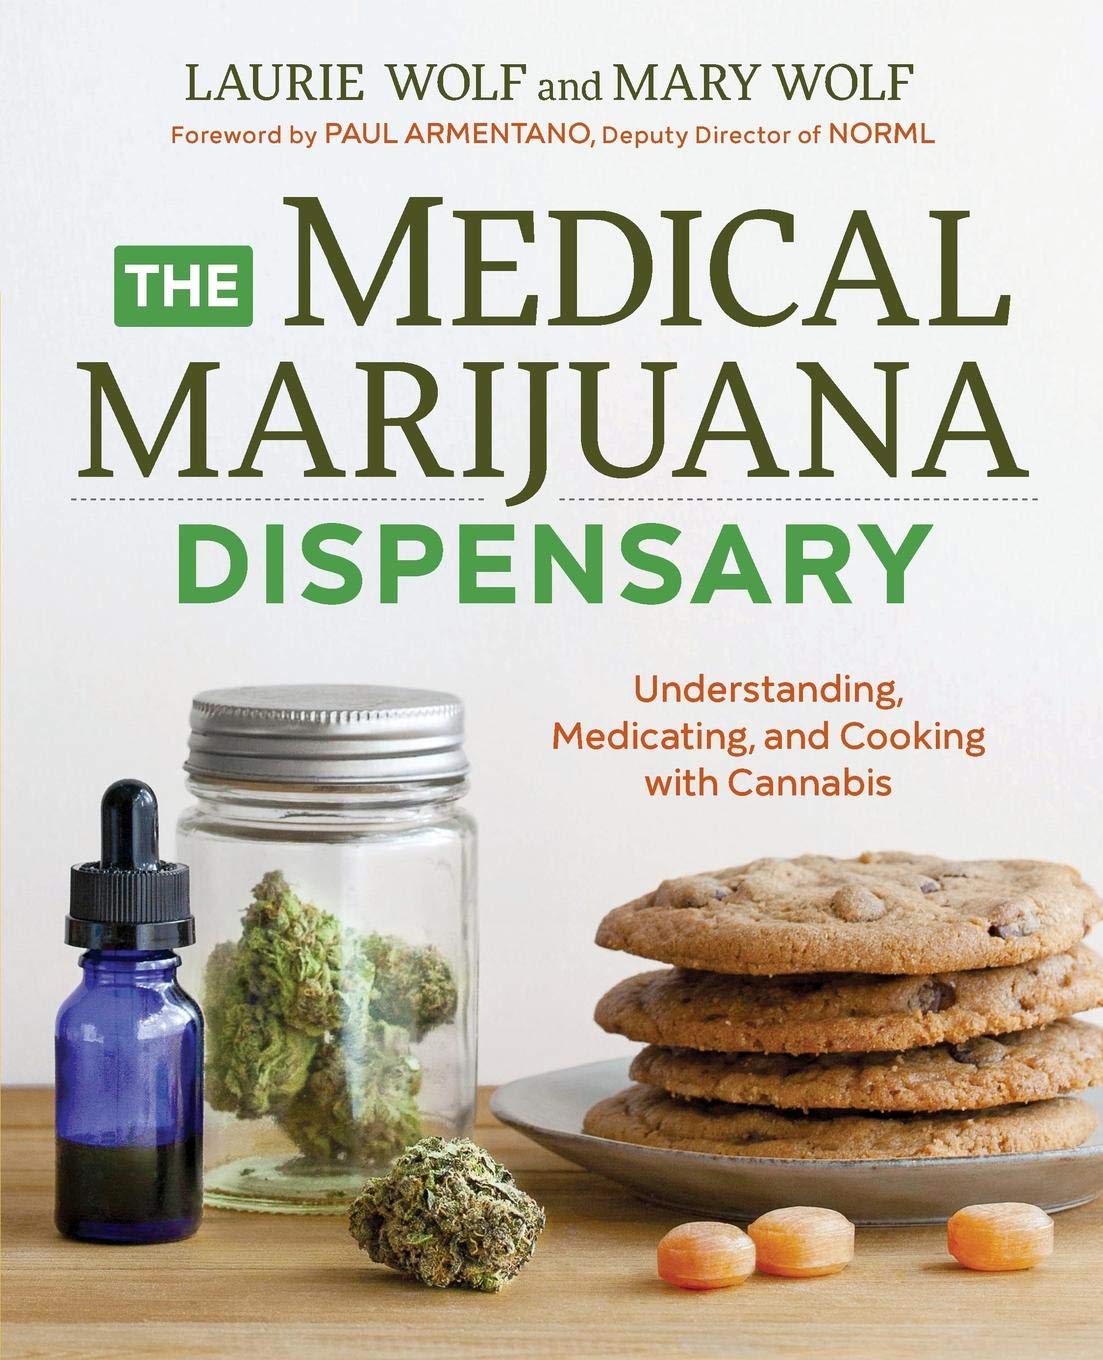 The Medical Marijuana Dispensary: Understanding, Medicating, and Cooking with Cannabis by Laurie Wolf, Mary Wolf